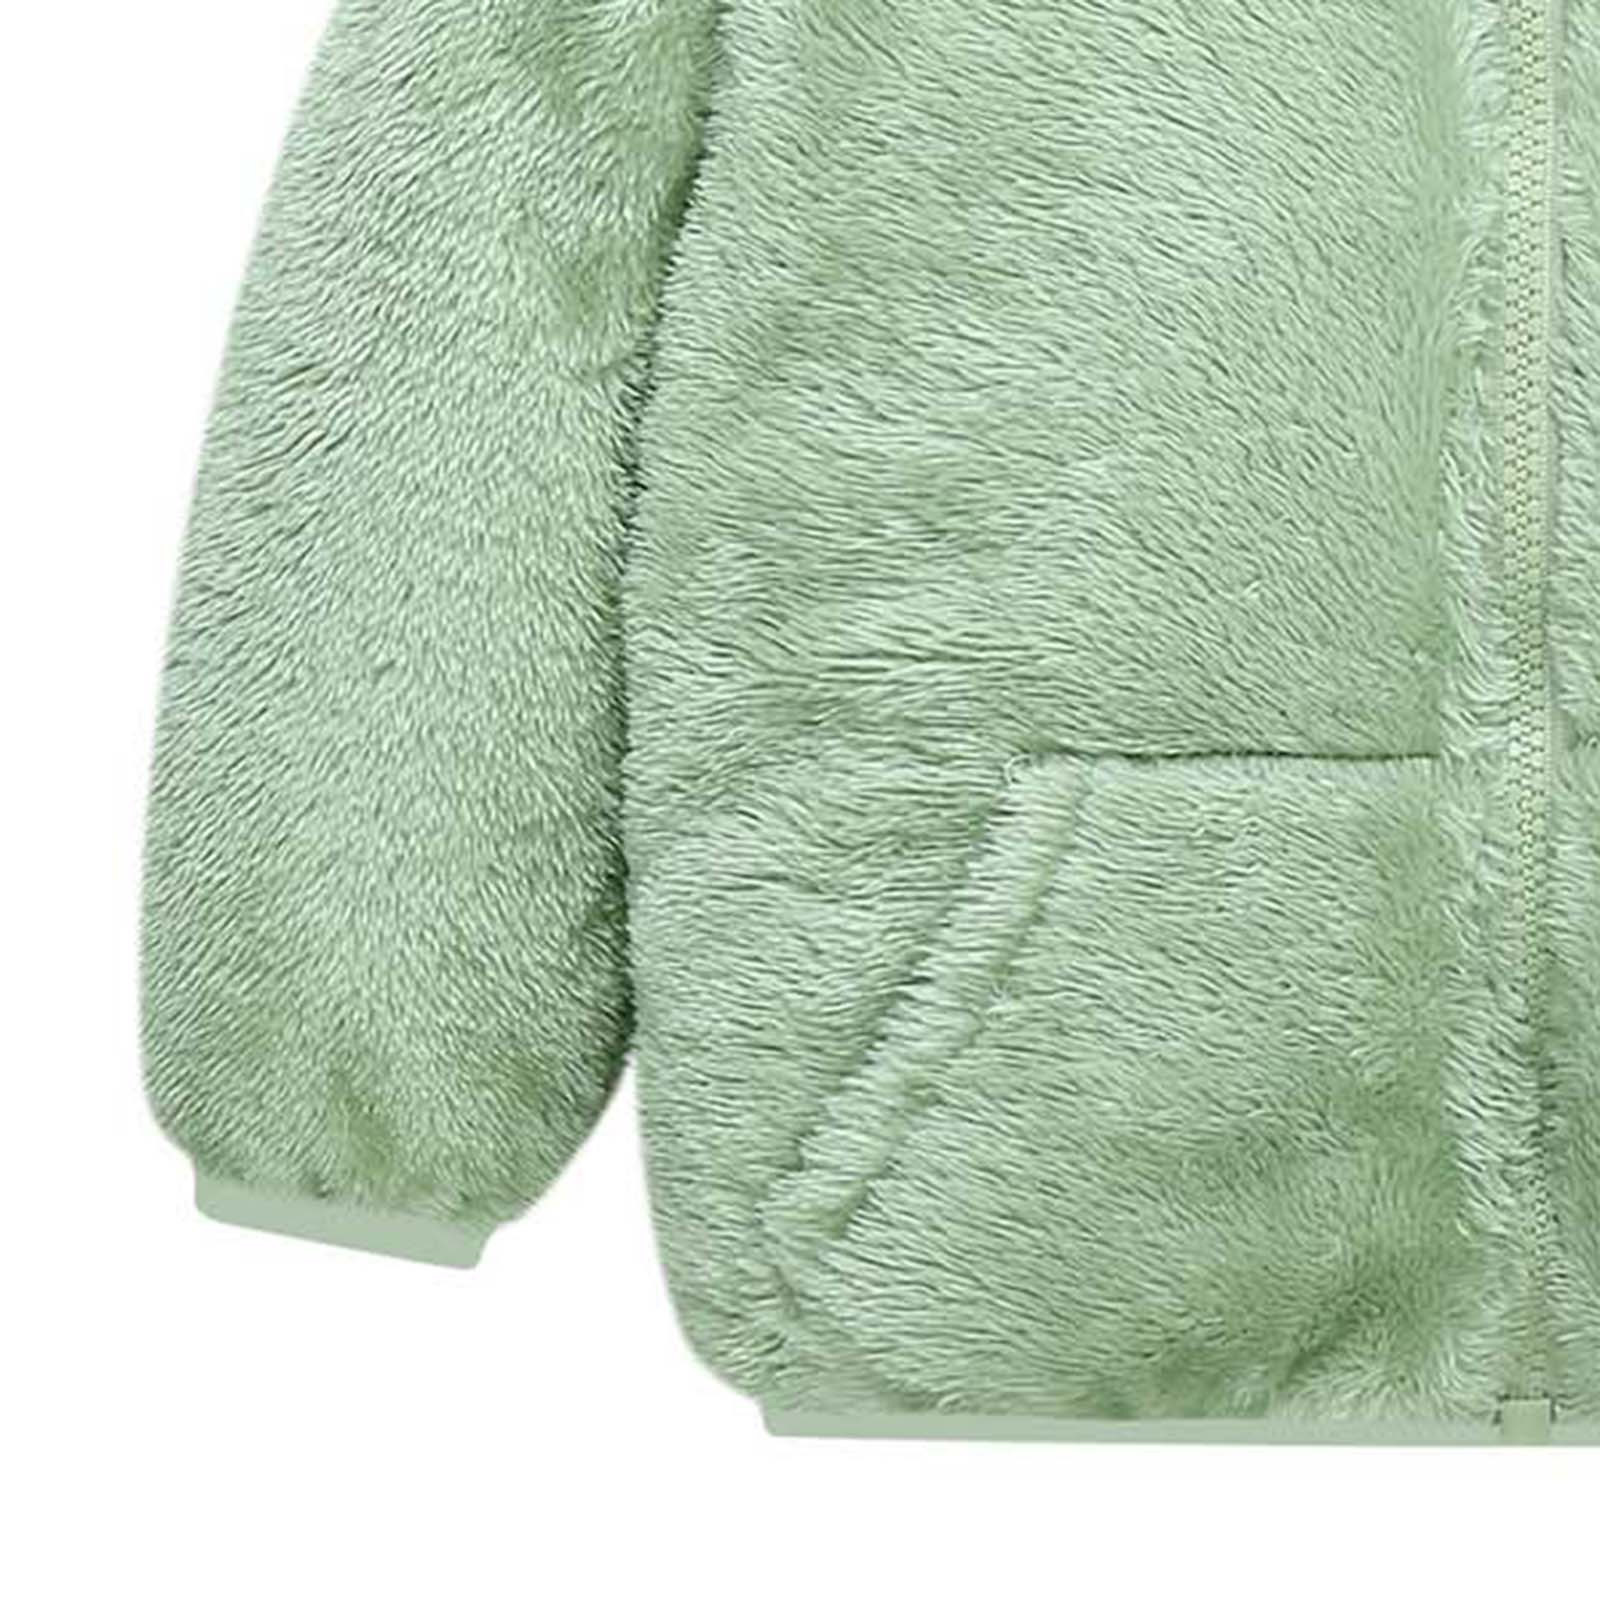 Tagold Boys and Girls Winter Cotton Coats Outerwear Jackets Baby Kids Fleece Hoodie Tops Fall Winter Hooded Jacket Solid Coat Gifts for Kids on Clearance Green 6-12 Months - image 4 of 5